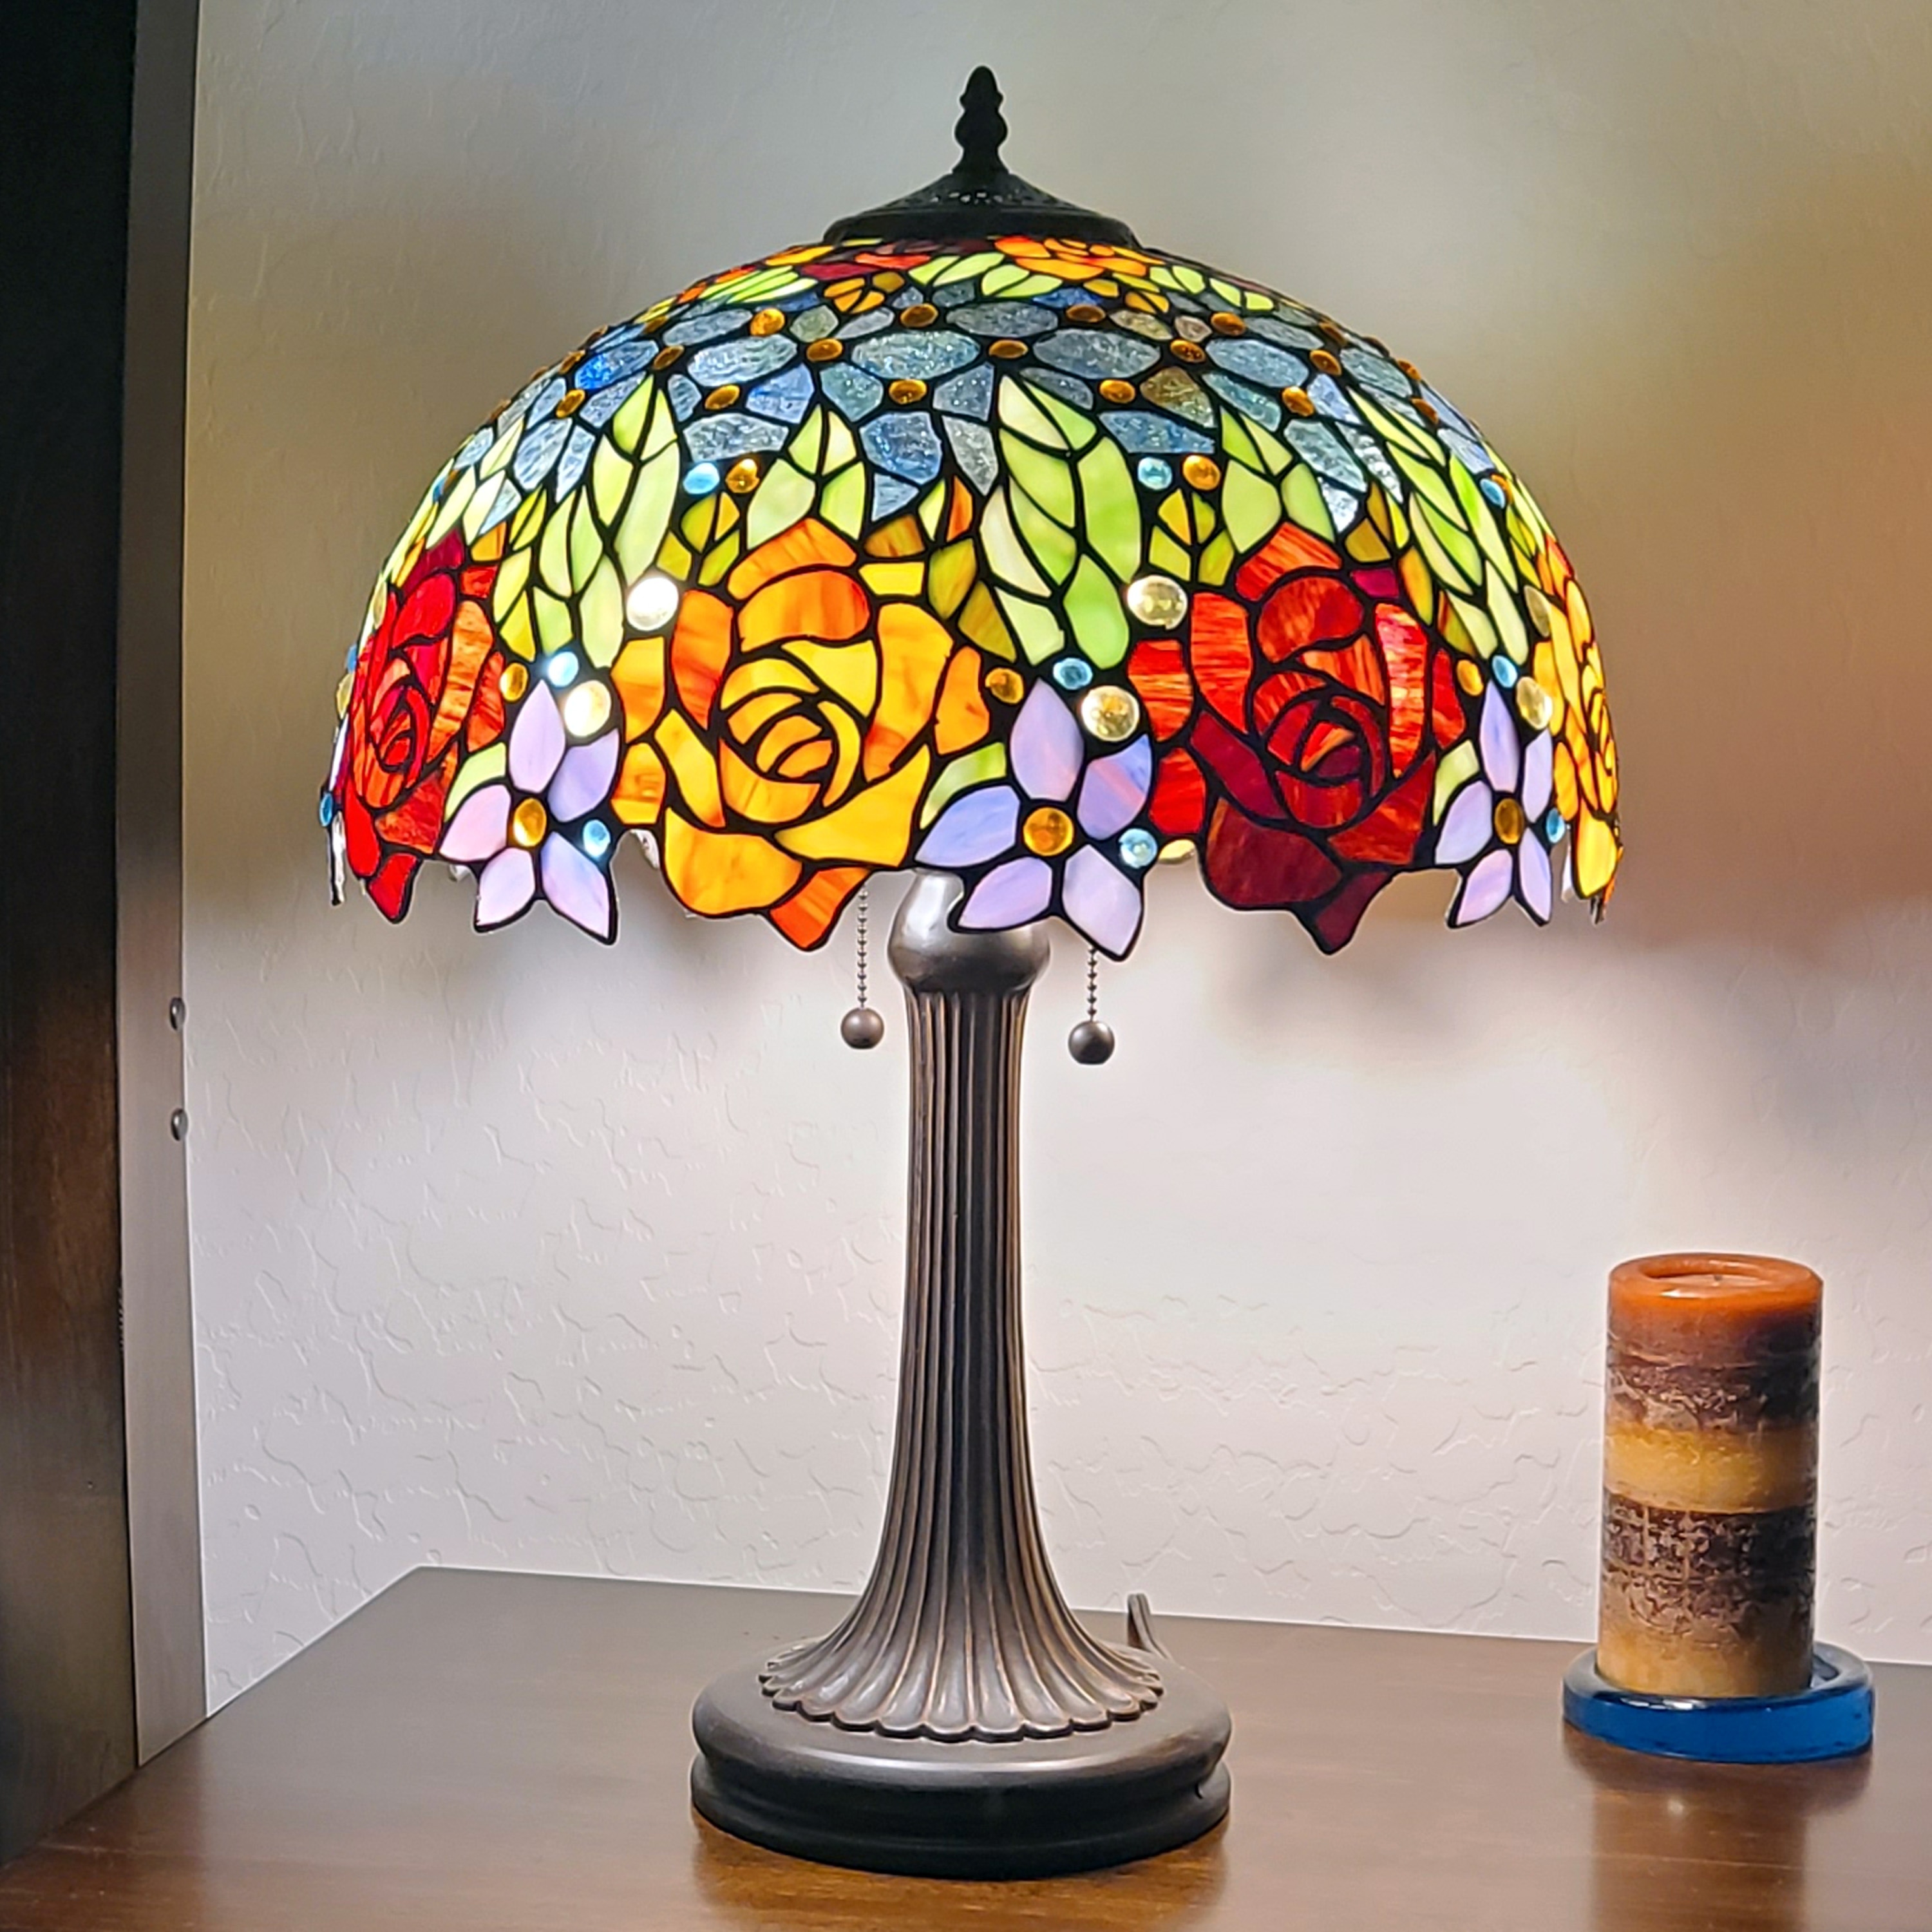 https://ak1.ostkcdn.com/images/products/is/images/direct/8f2a9fdb4963c6a233075fccbf55372bc20b9ecd/Tiffany-Style-Table-Lamp-23%22-Tall-Stained-Glass-Floral-Decor-Nightstand-Bedroom-Office-Handmade-Gift-AM1534TL16B-Amora-Lighting.jpg